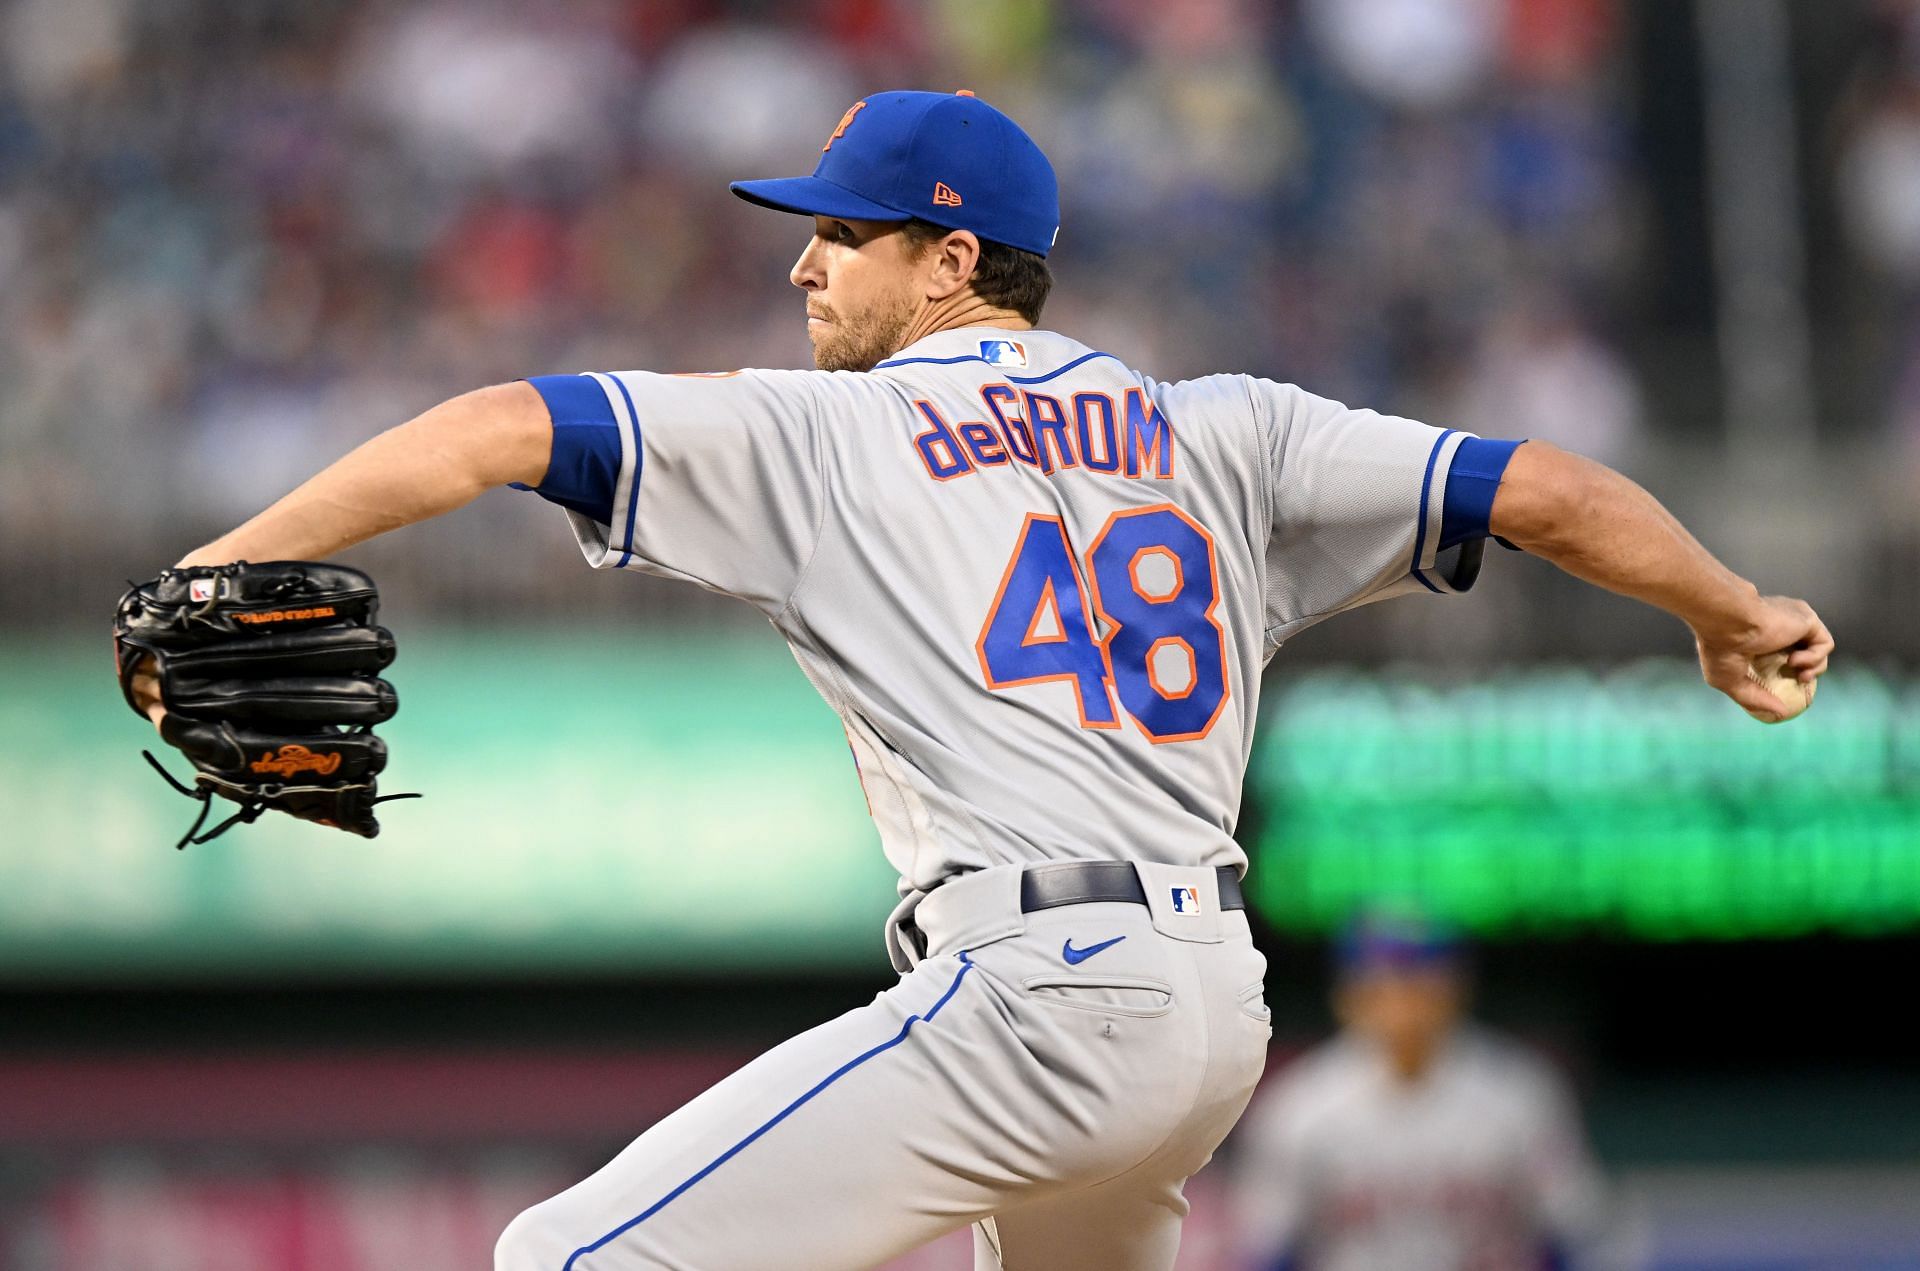 Mets fans rejoice at report that All-Star pitcher Jacob deGrom